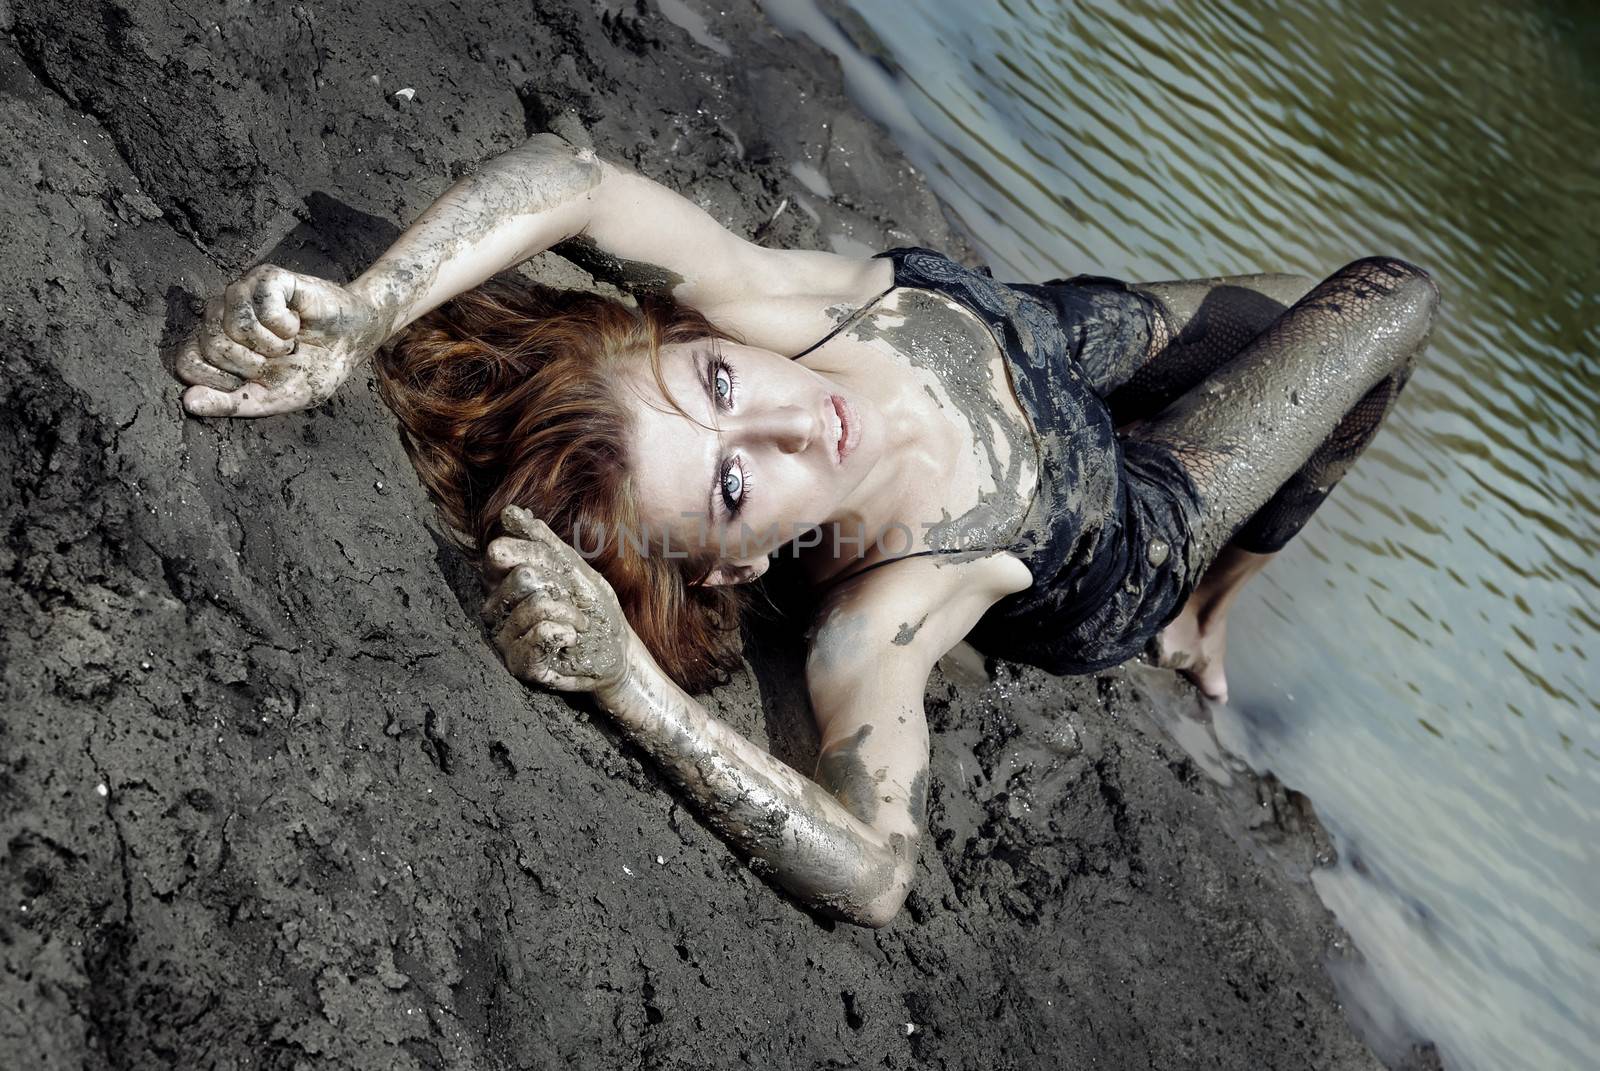 Dirty woman laying in the beach with passionate emotion